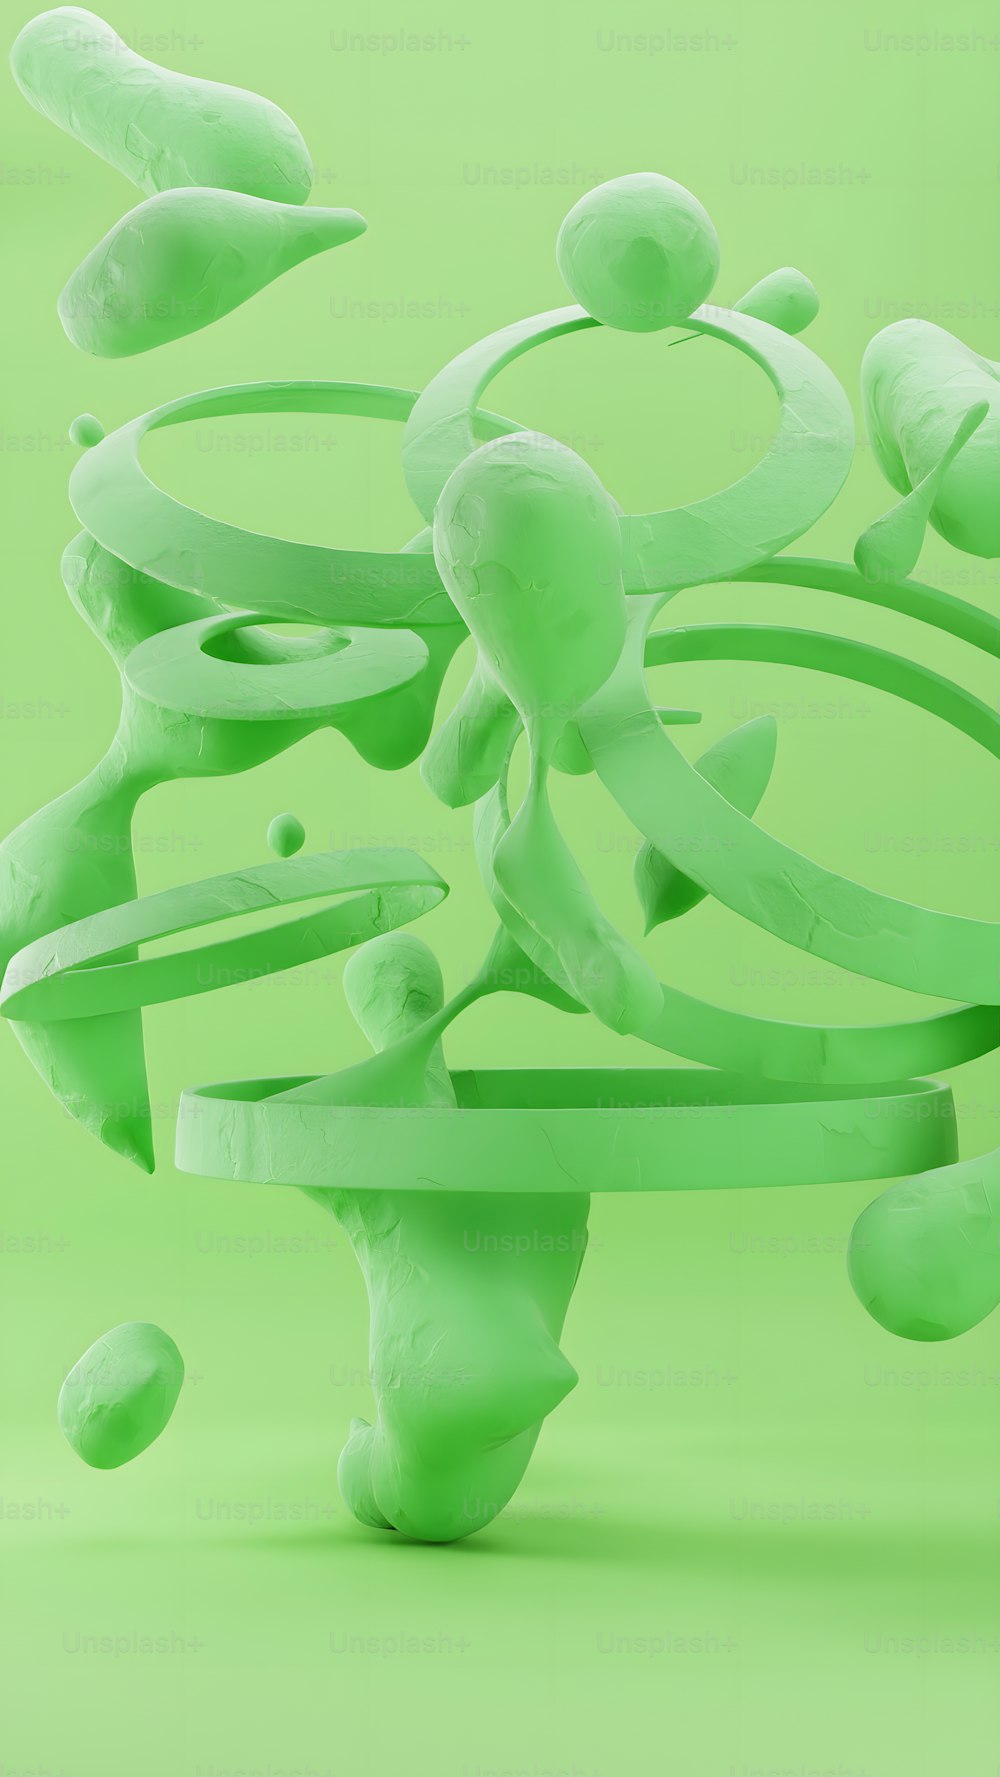 a sculpture made out of plasticine on a green background